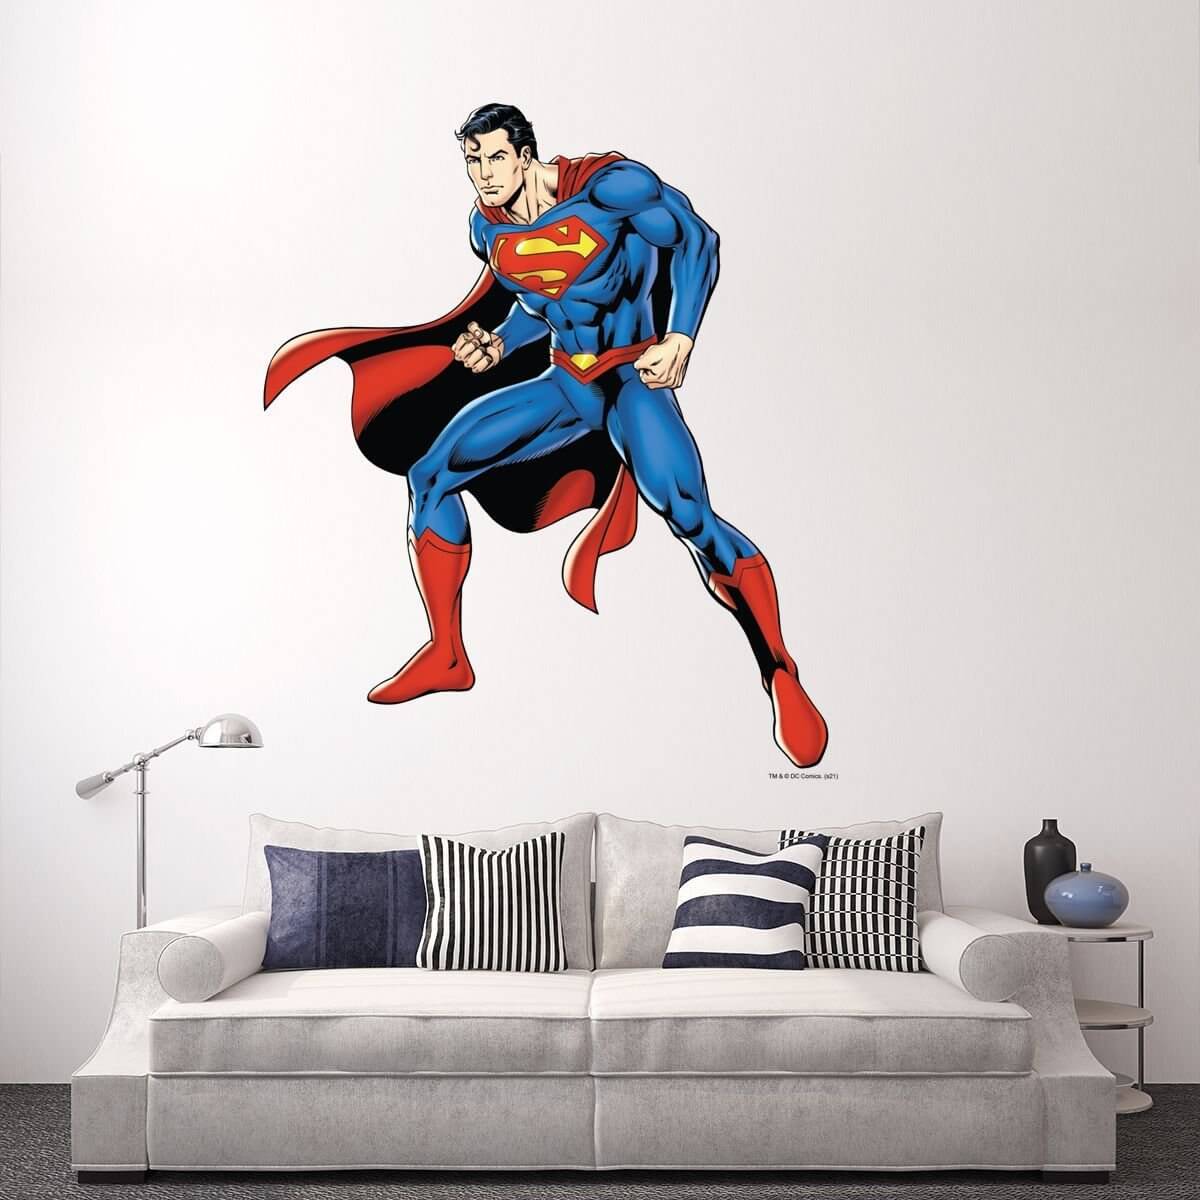 Kismet Decals Superman Combat Ready Licensed Wall Sticker - Easy DIY Justice League Home & Room Decor Wall Art - Kismet Decals